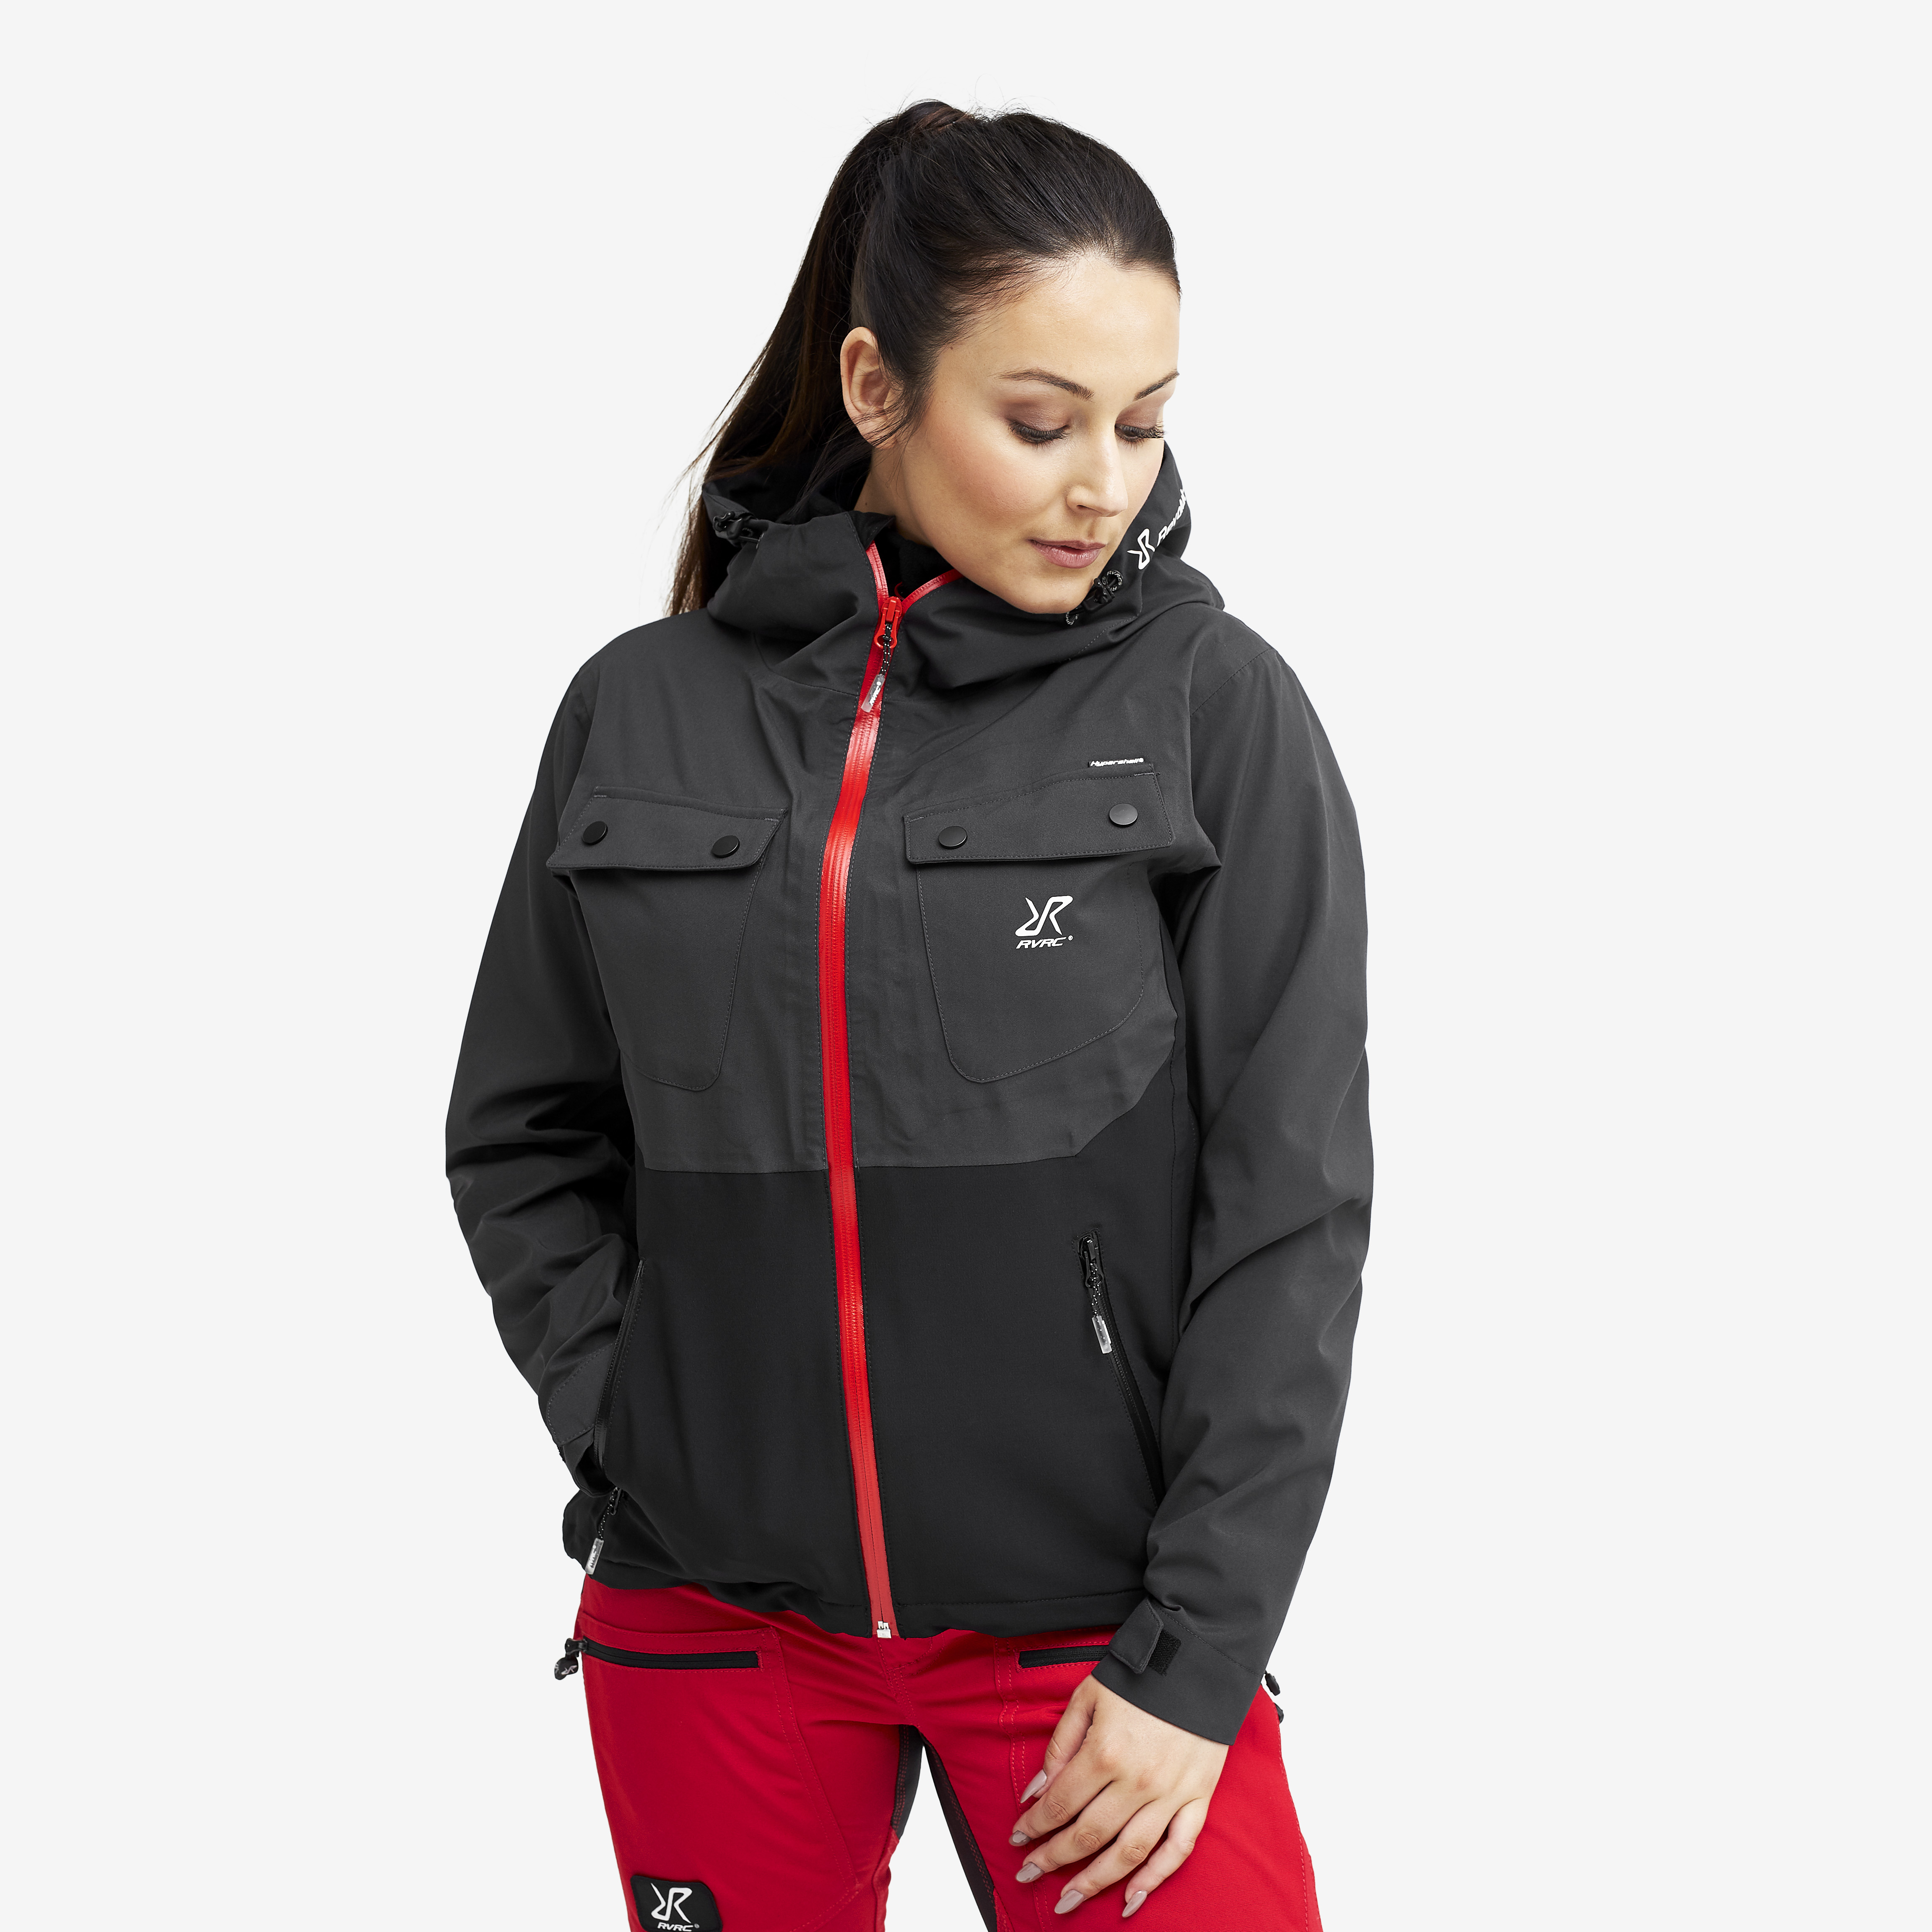 Hyper Jacket Anthracite Mujeres